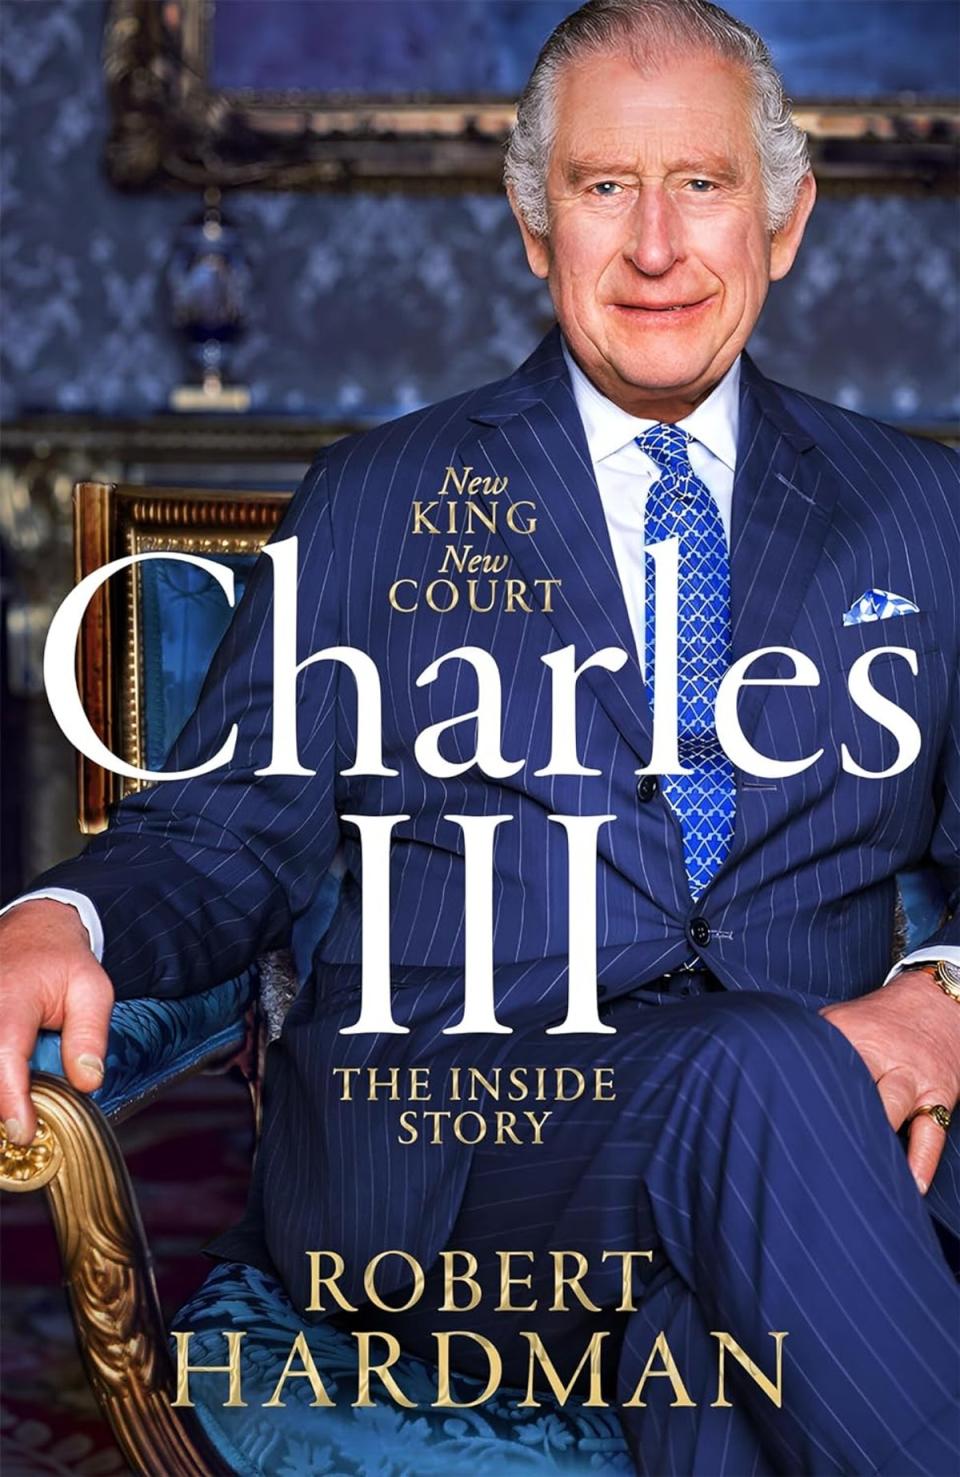 Robert Hardman offers an insider account of the first year of King Charles III’s reign (source)